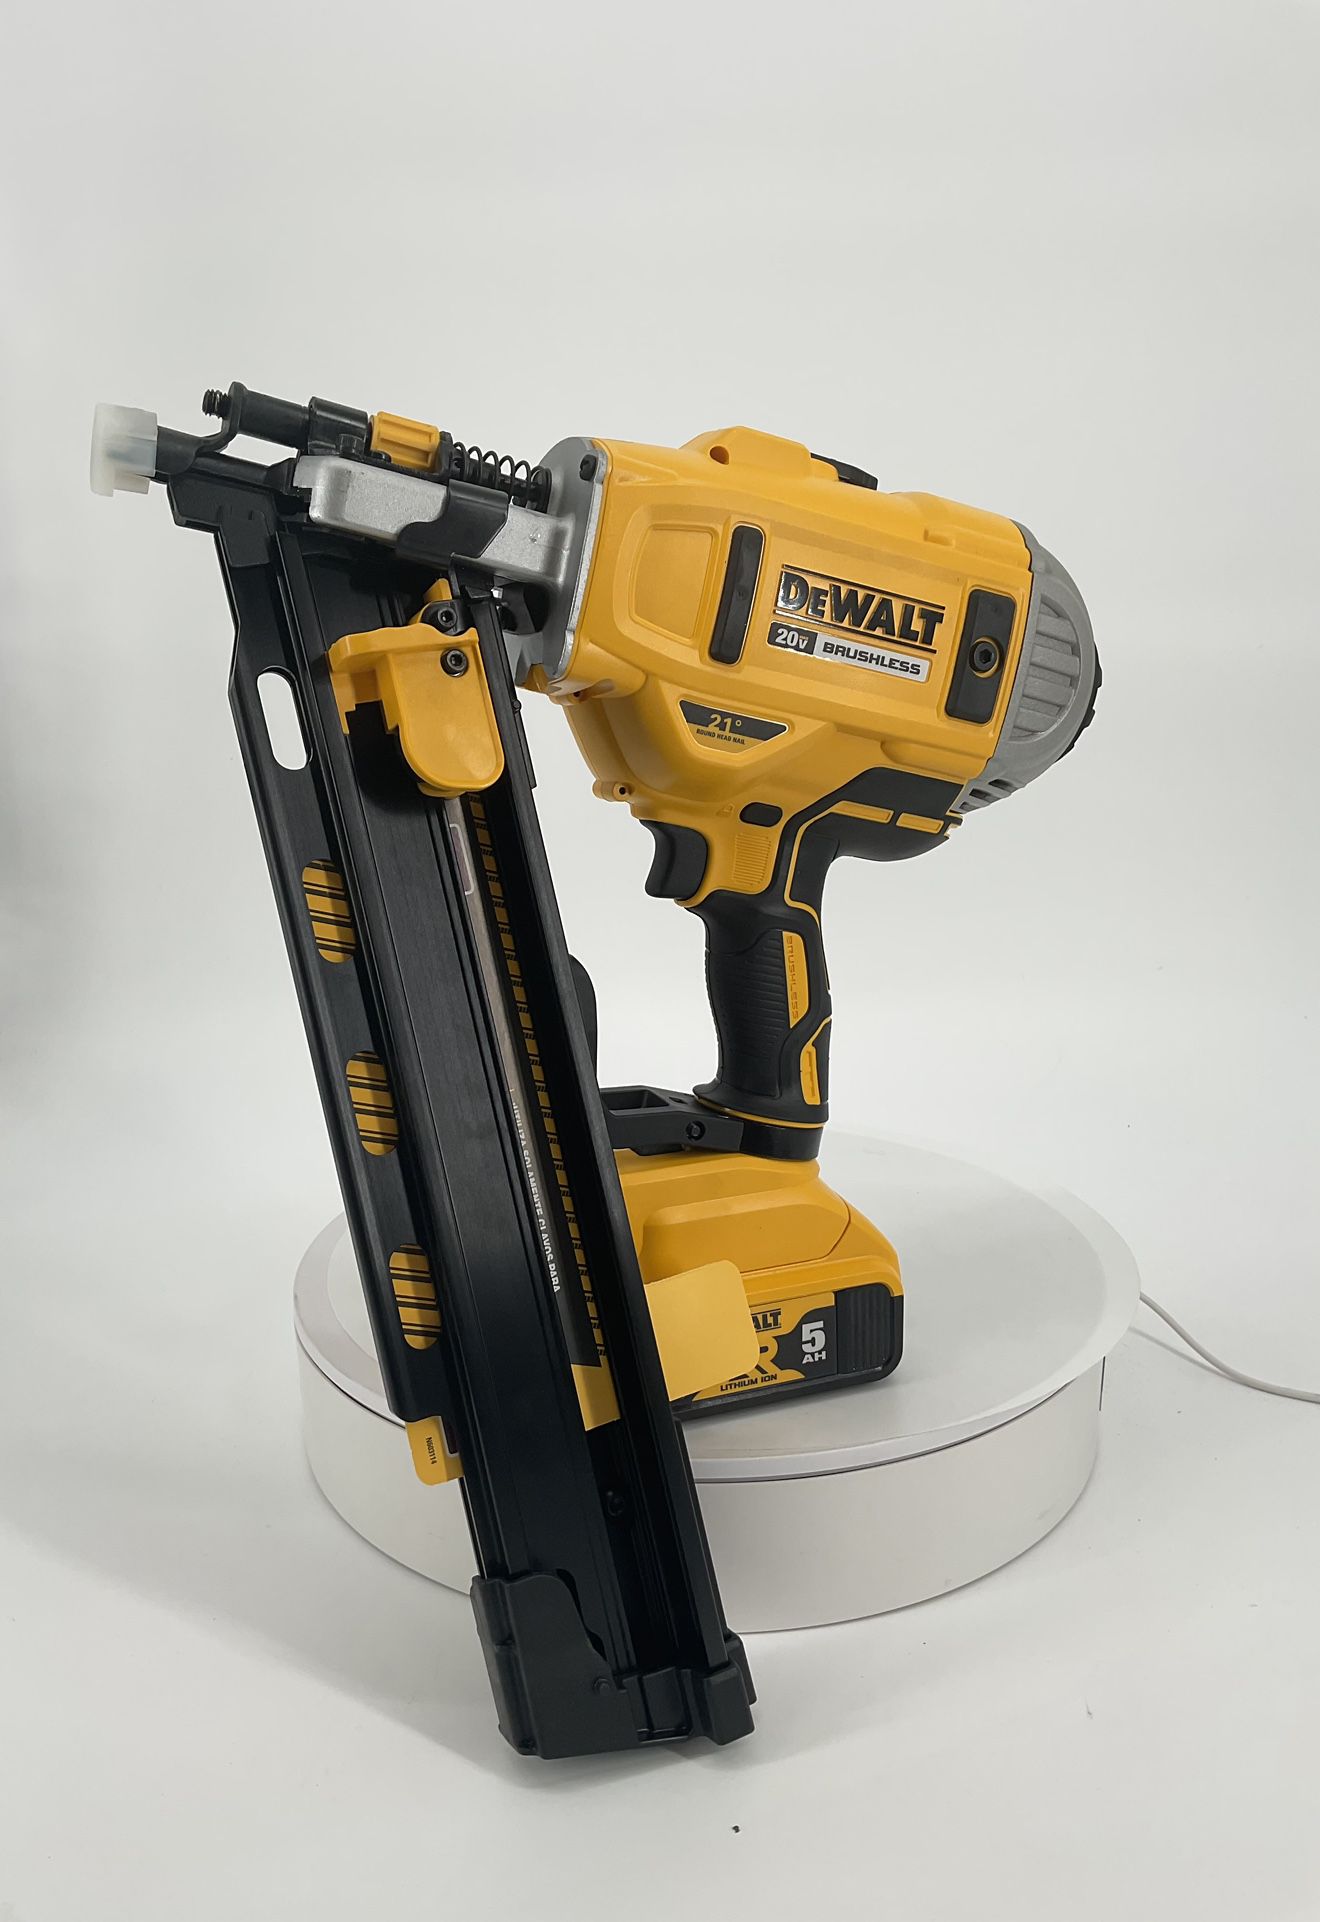 DEWALT 20V MAX XR Lithium-Ion Cordless Brushless 2-Speed 21° Plastic Collated Framing Nailer (Tool Only)